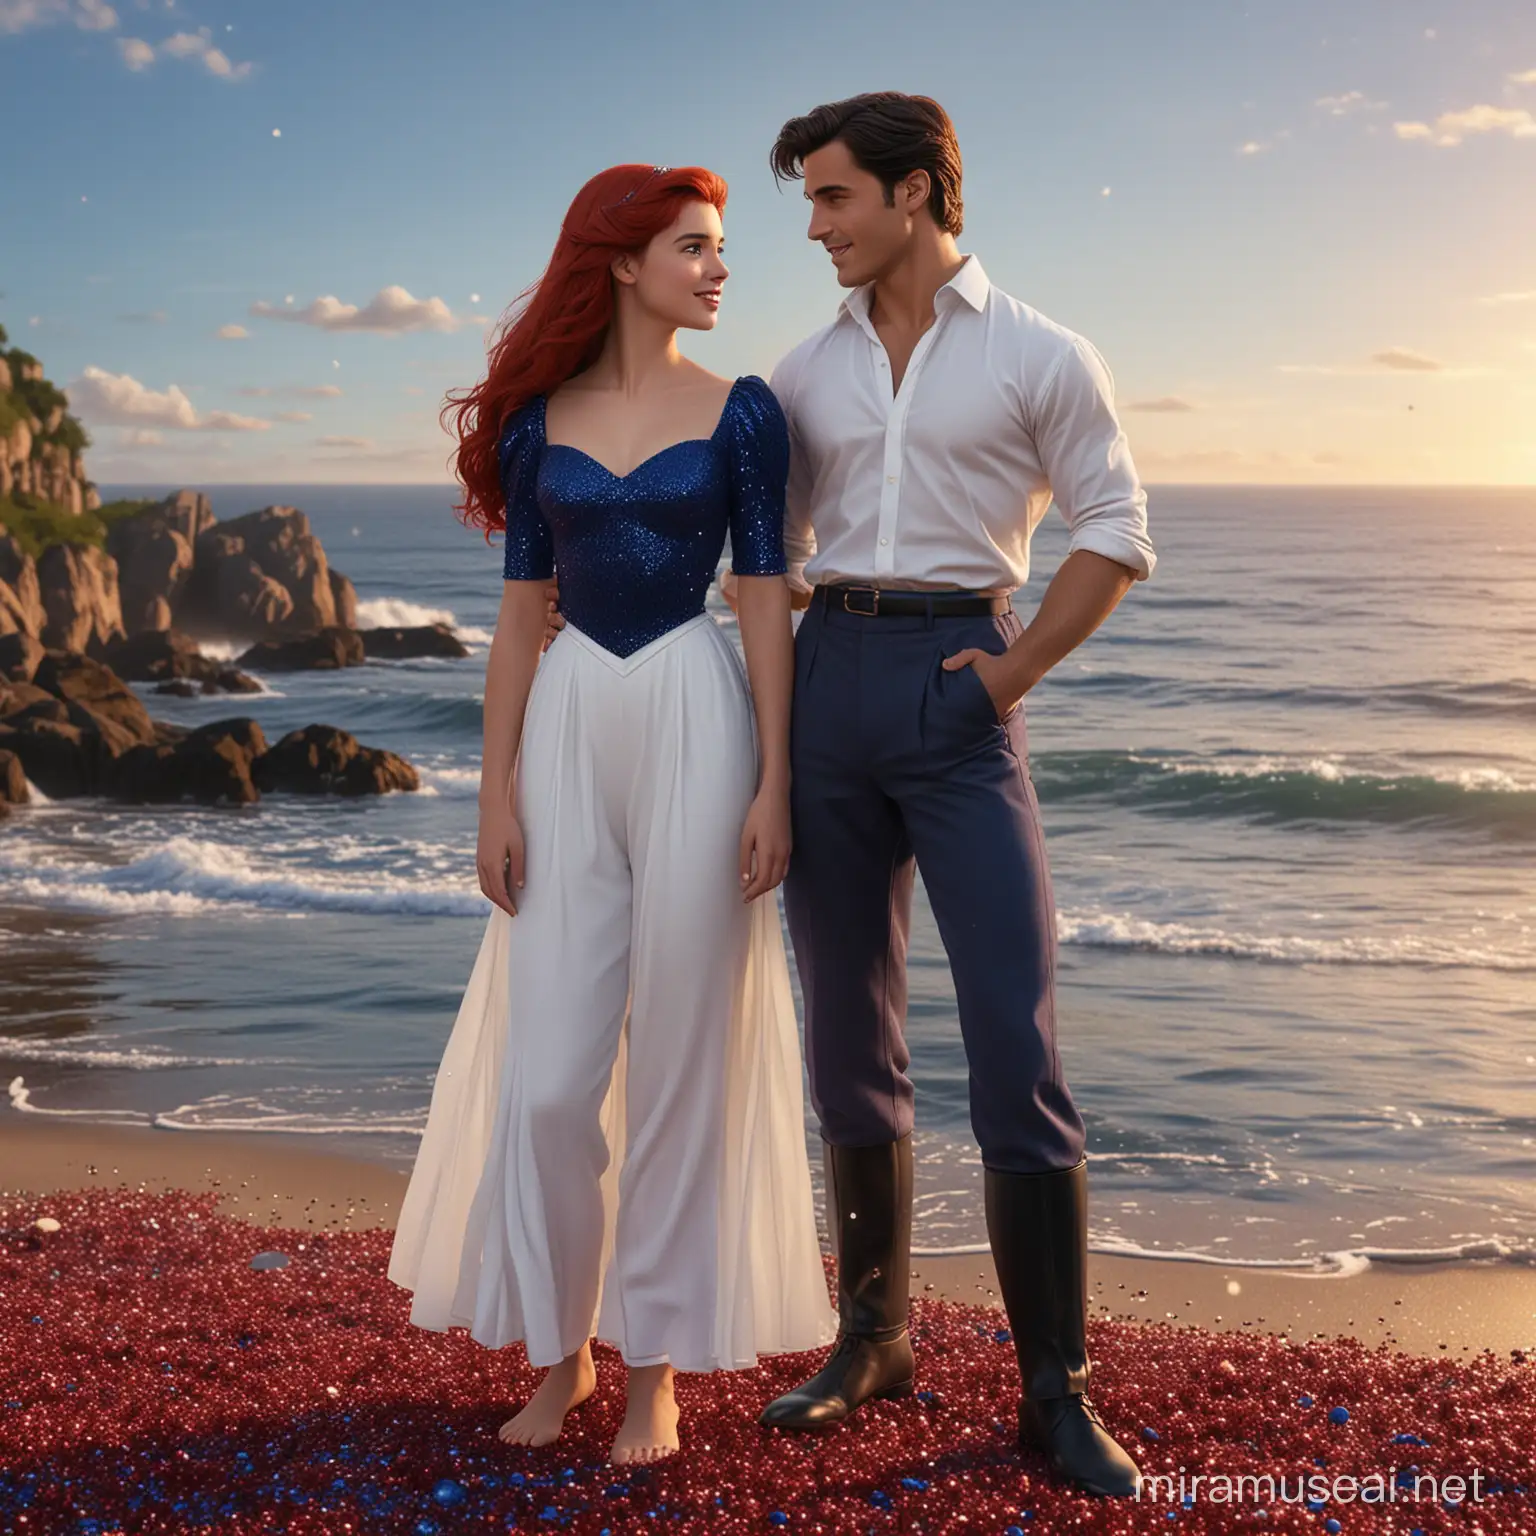 prince eric is danish 21-year-old with short black hair and white shirt and dark blue trousers,
princess disney ariel is 16-year-old danish girl, red long hair and long blue glitter dress, photorealism, 8k resolution, sea natural background